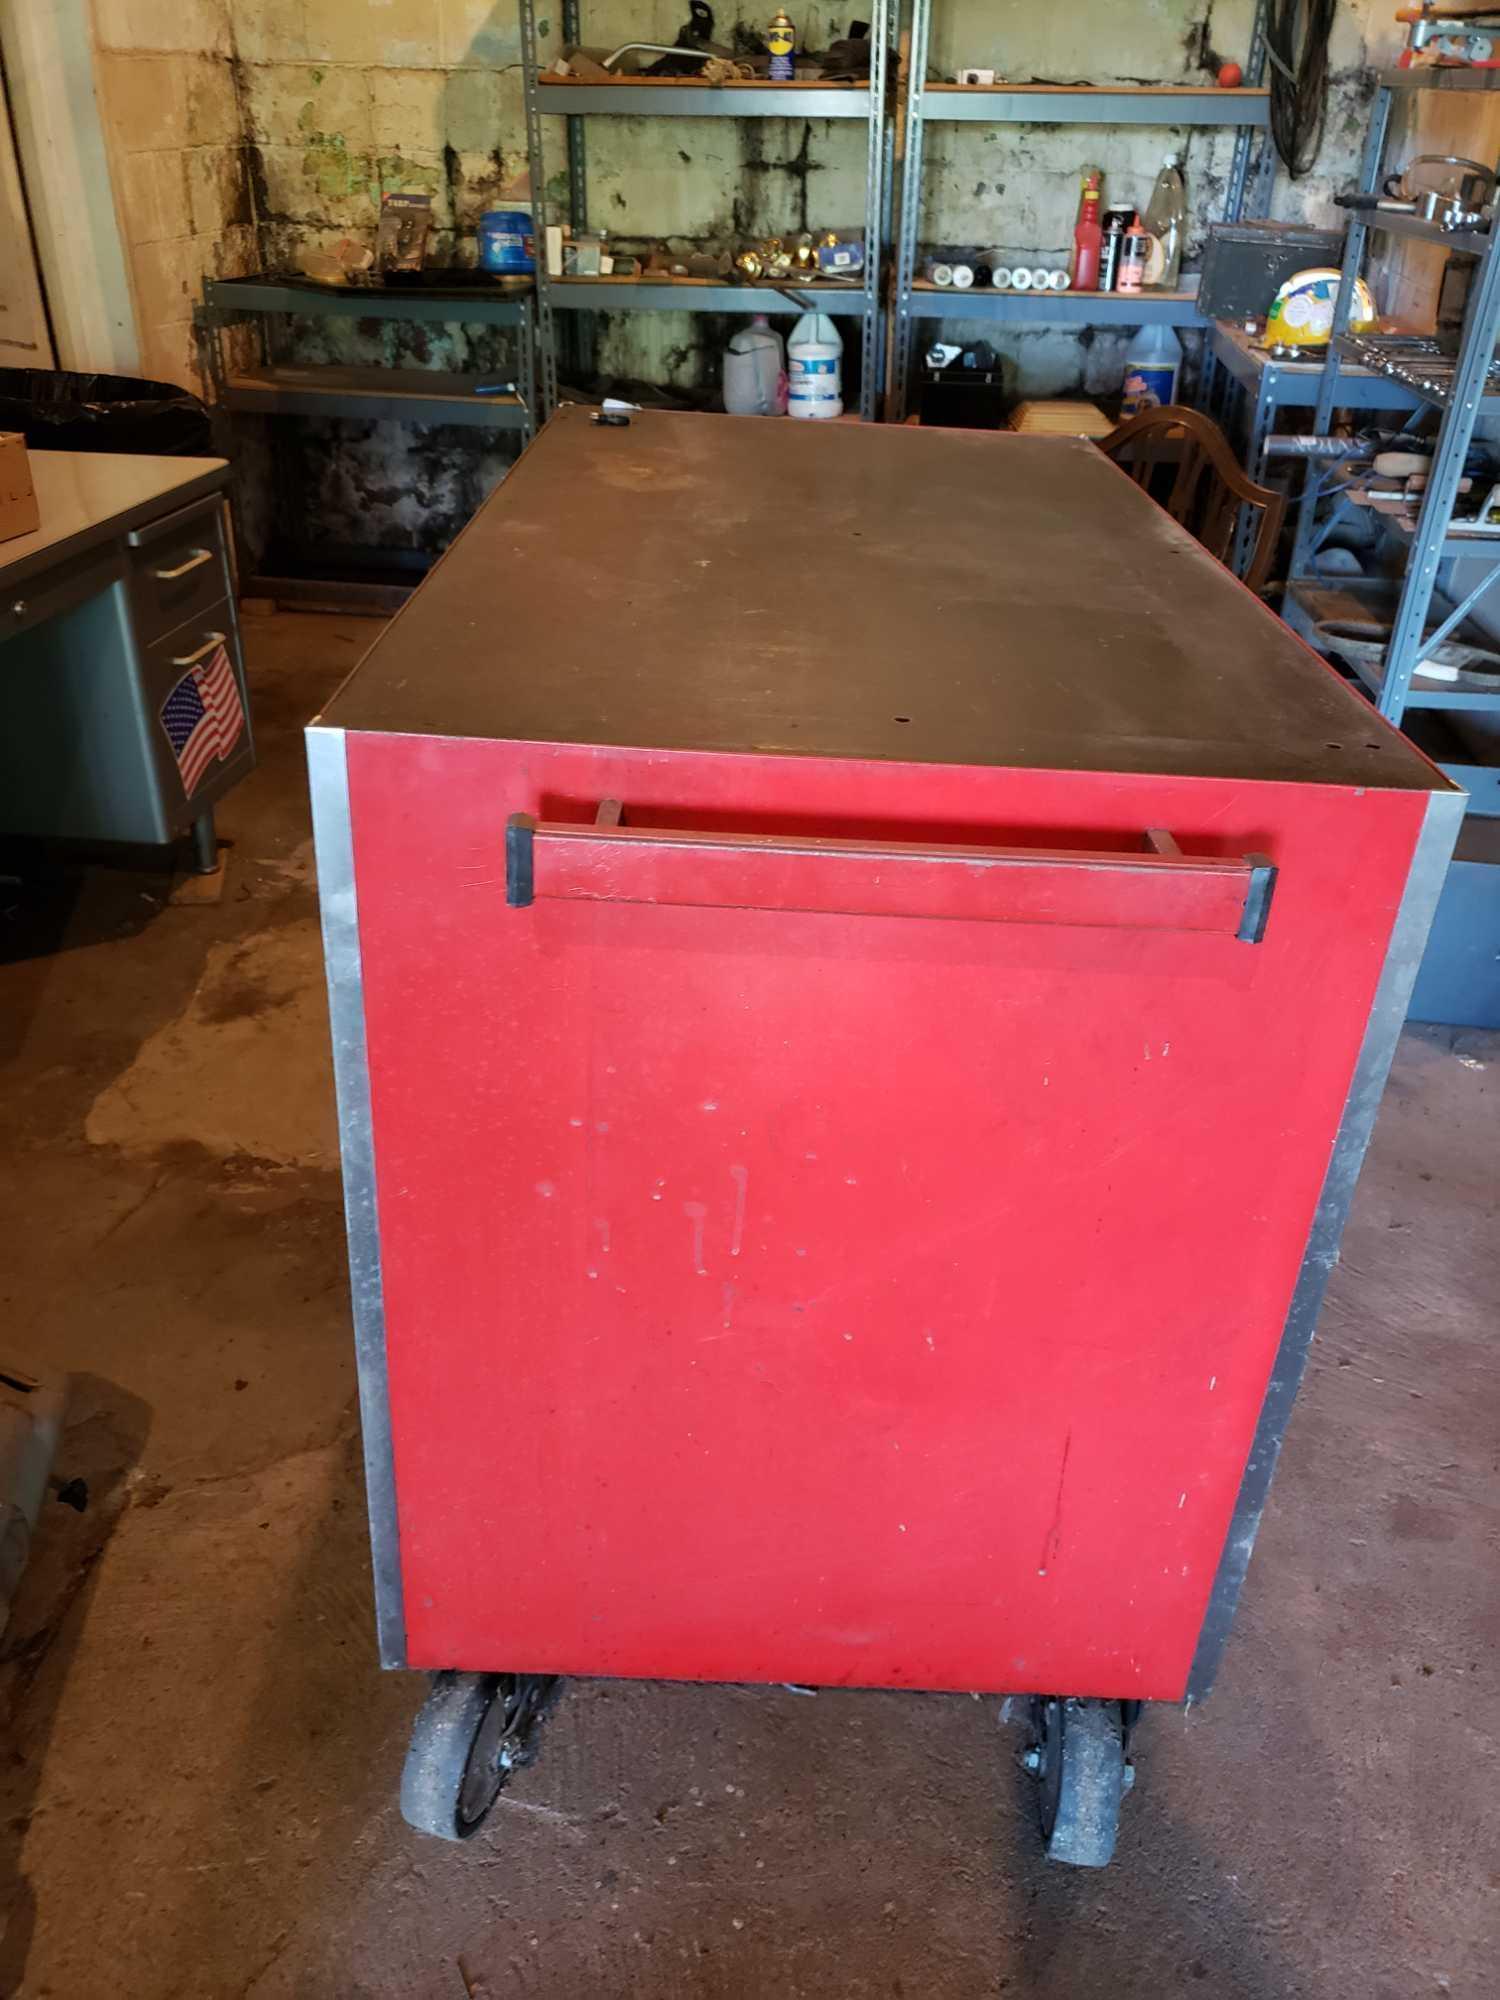 Snap-On toolbox on casters